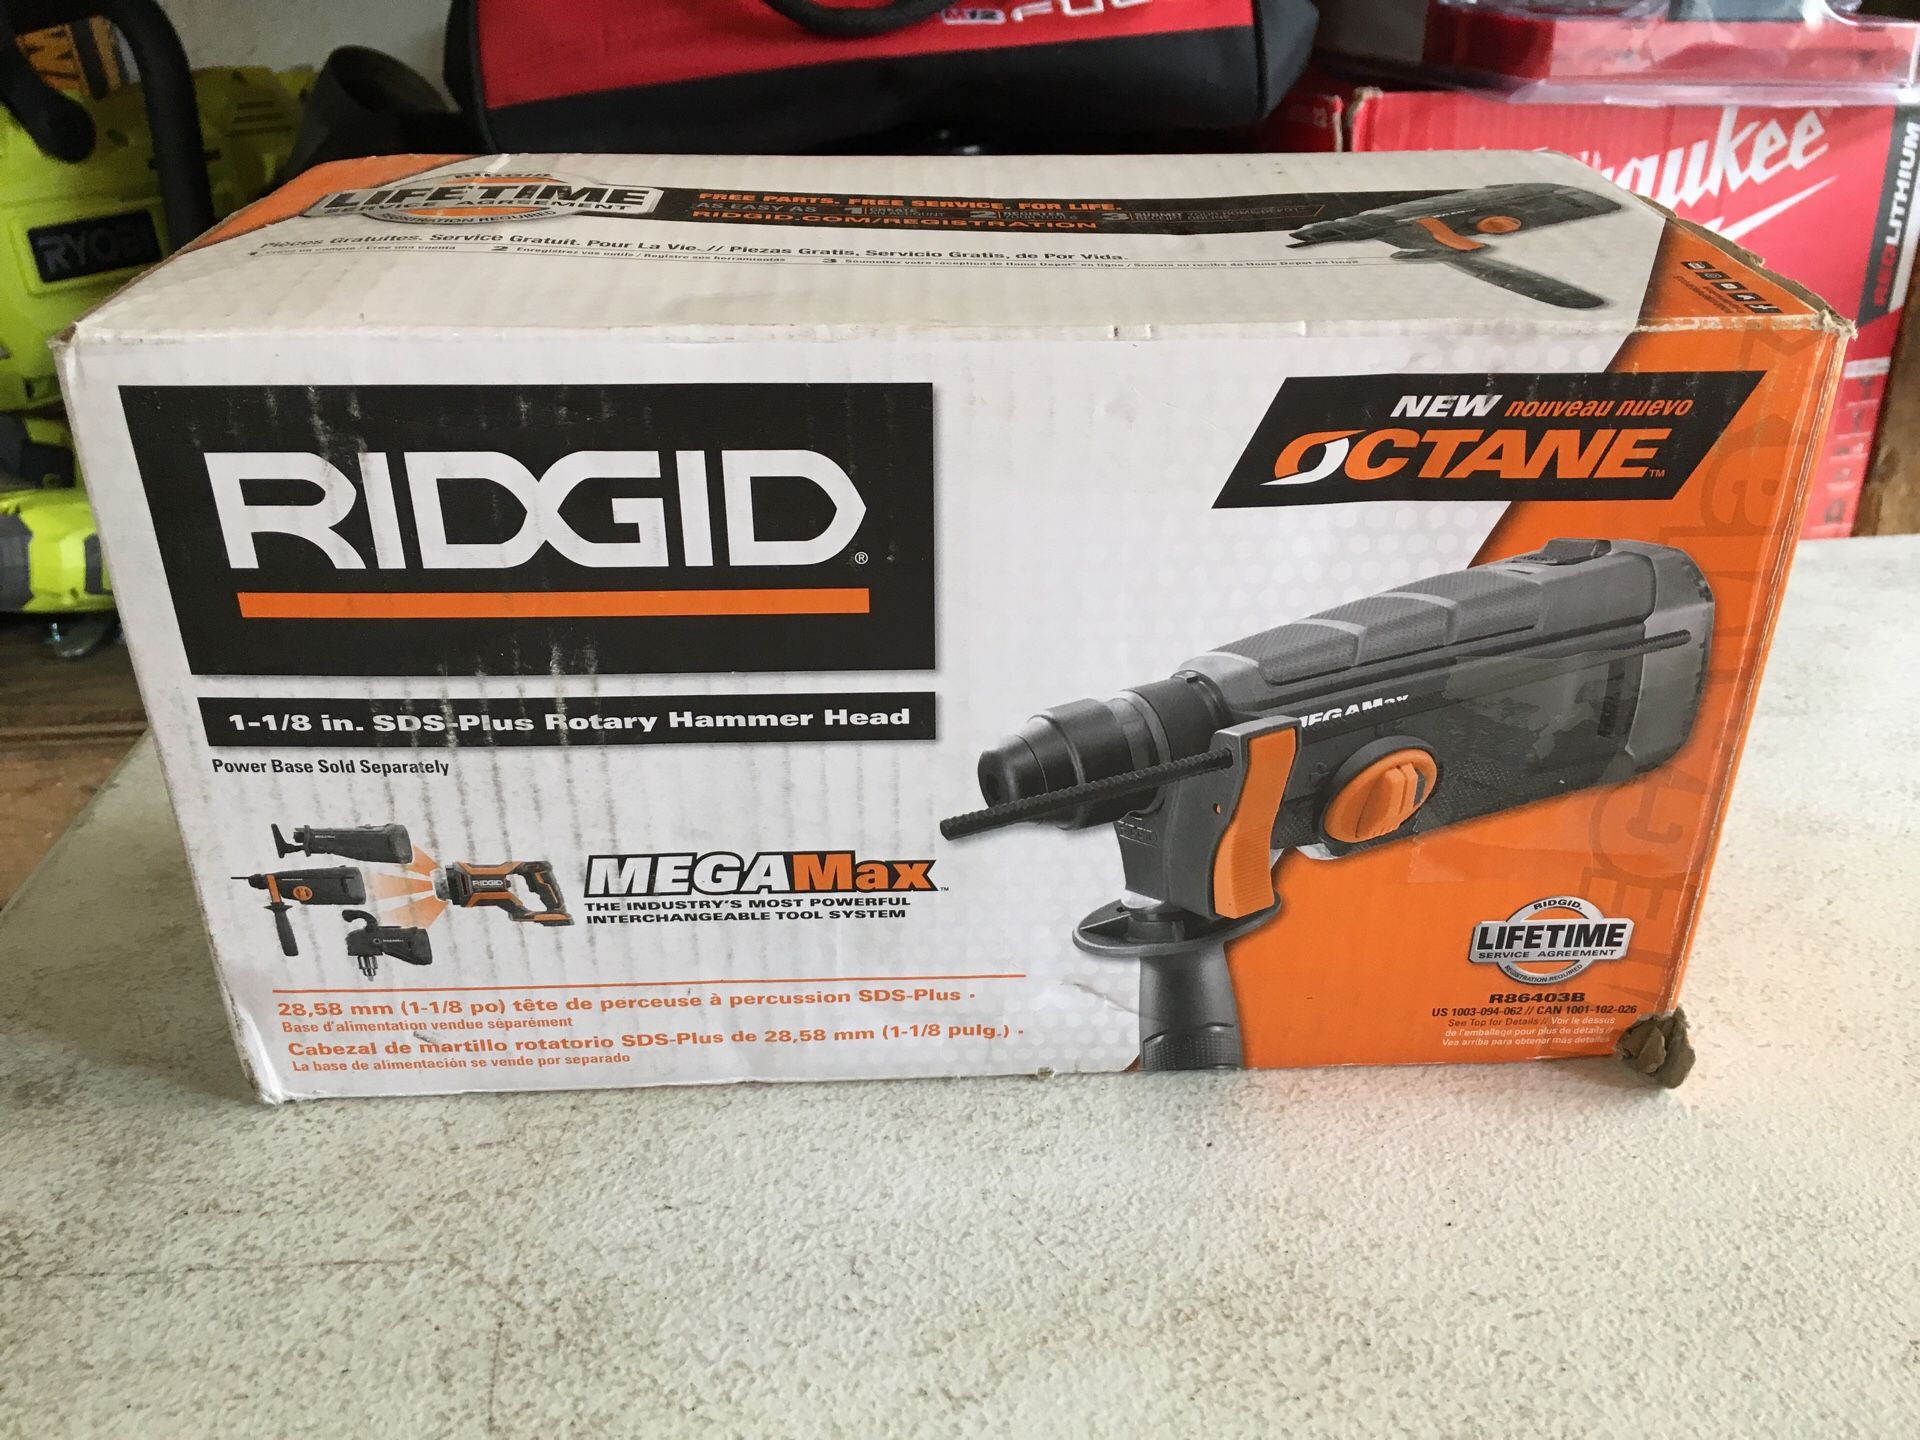 RIDGID 18-Volt OCTANE MEGAMax 1-1/8 in. SDS-Plus Rotary Hammer (Attachment Head Only)